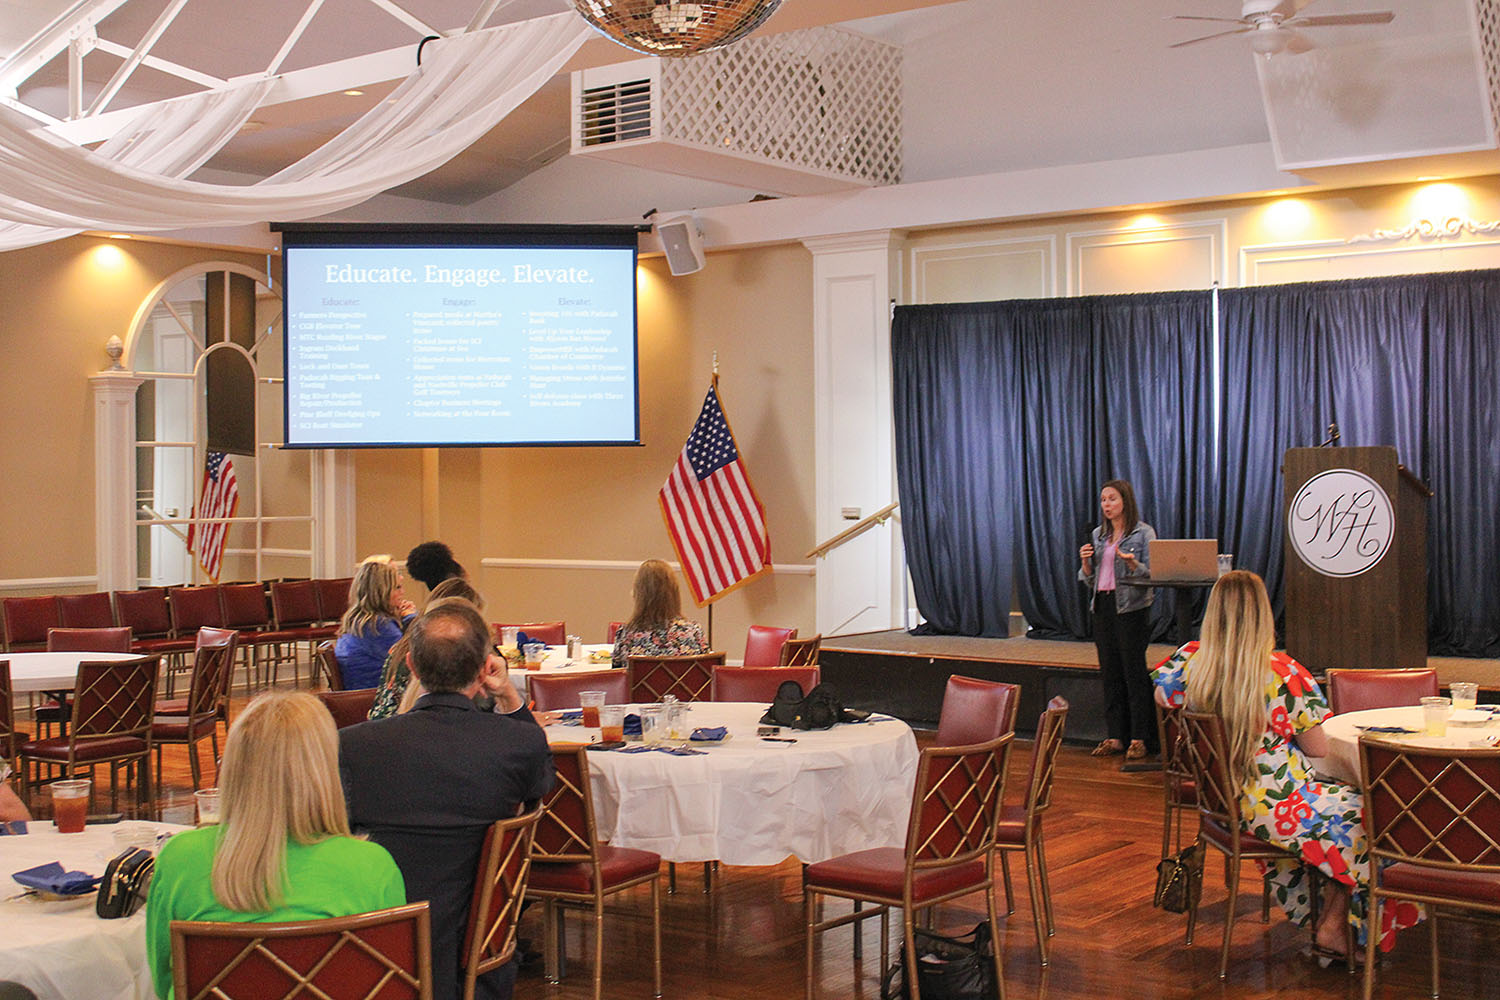 Whitney Cruse, president of Women in Maritime Operations’ West Kentucky chapter, addresses the Port of Paducah Propeller Club on March 13 at Walker Hall in Paducah, Ky. (Photo by Shelley Byrne)